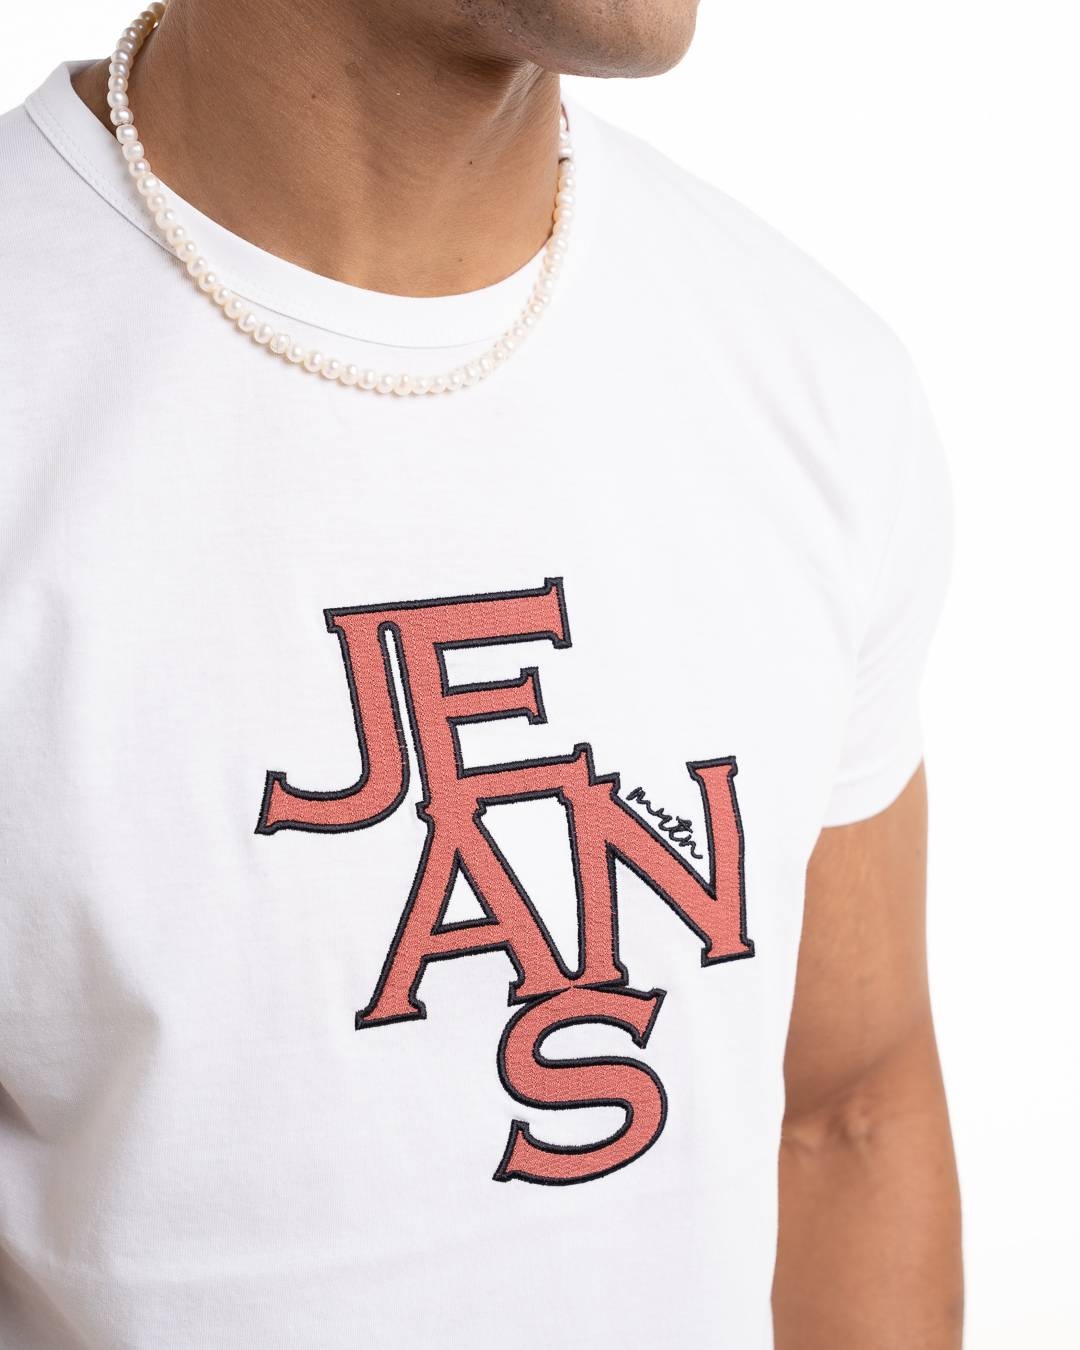 Martini 'Jeans' Embroidery T-shirt - White